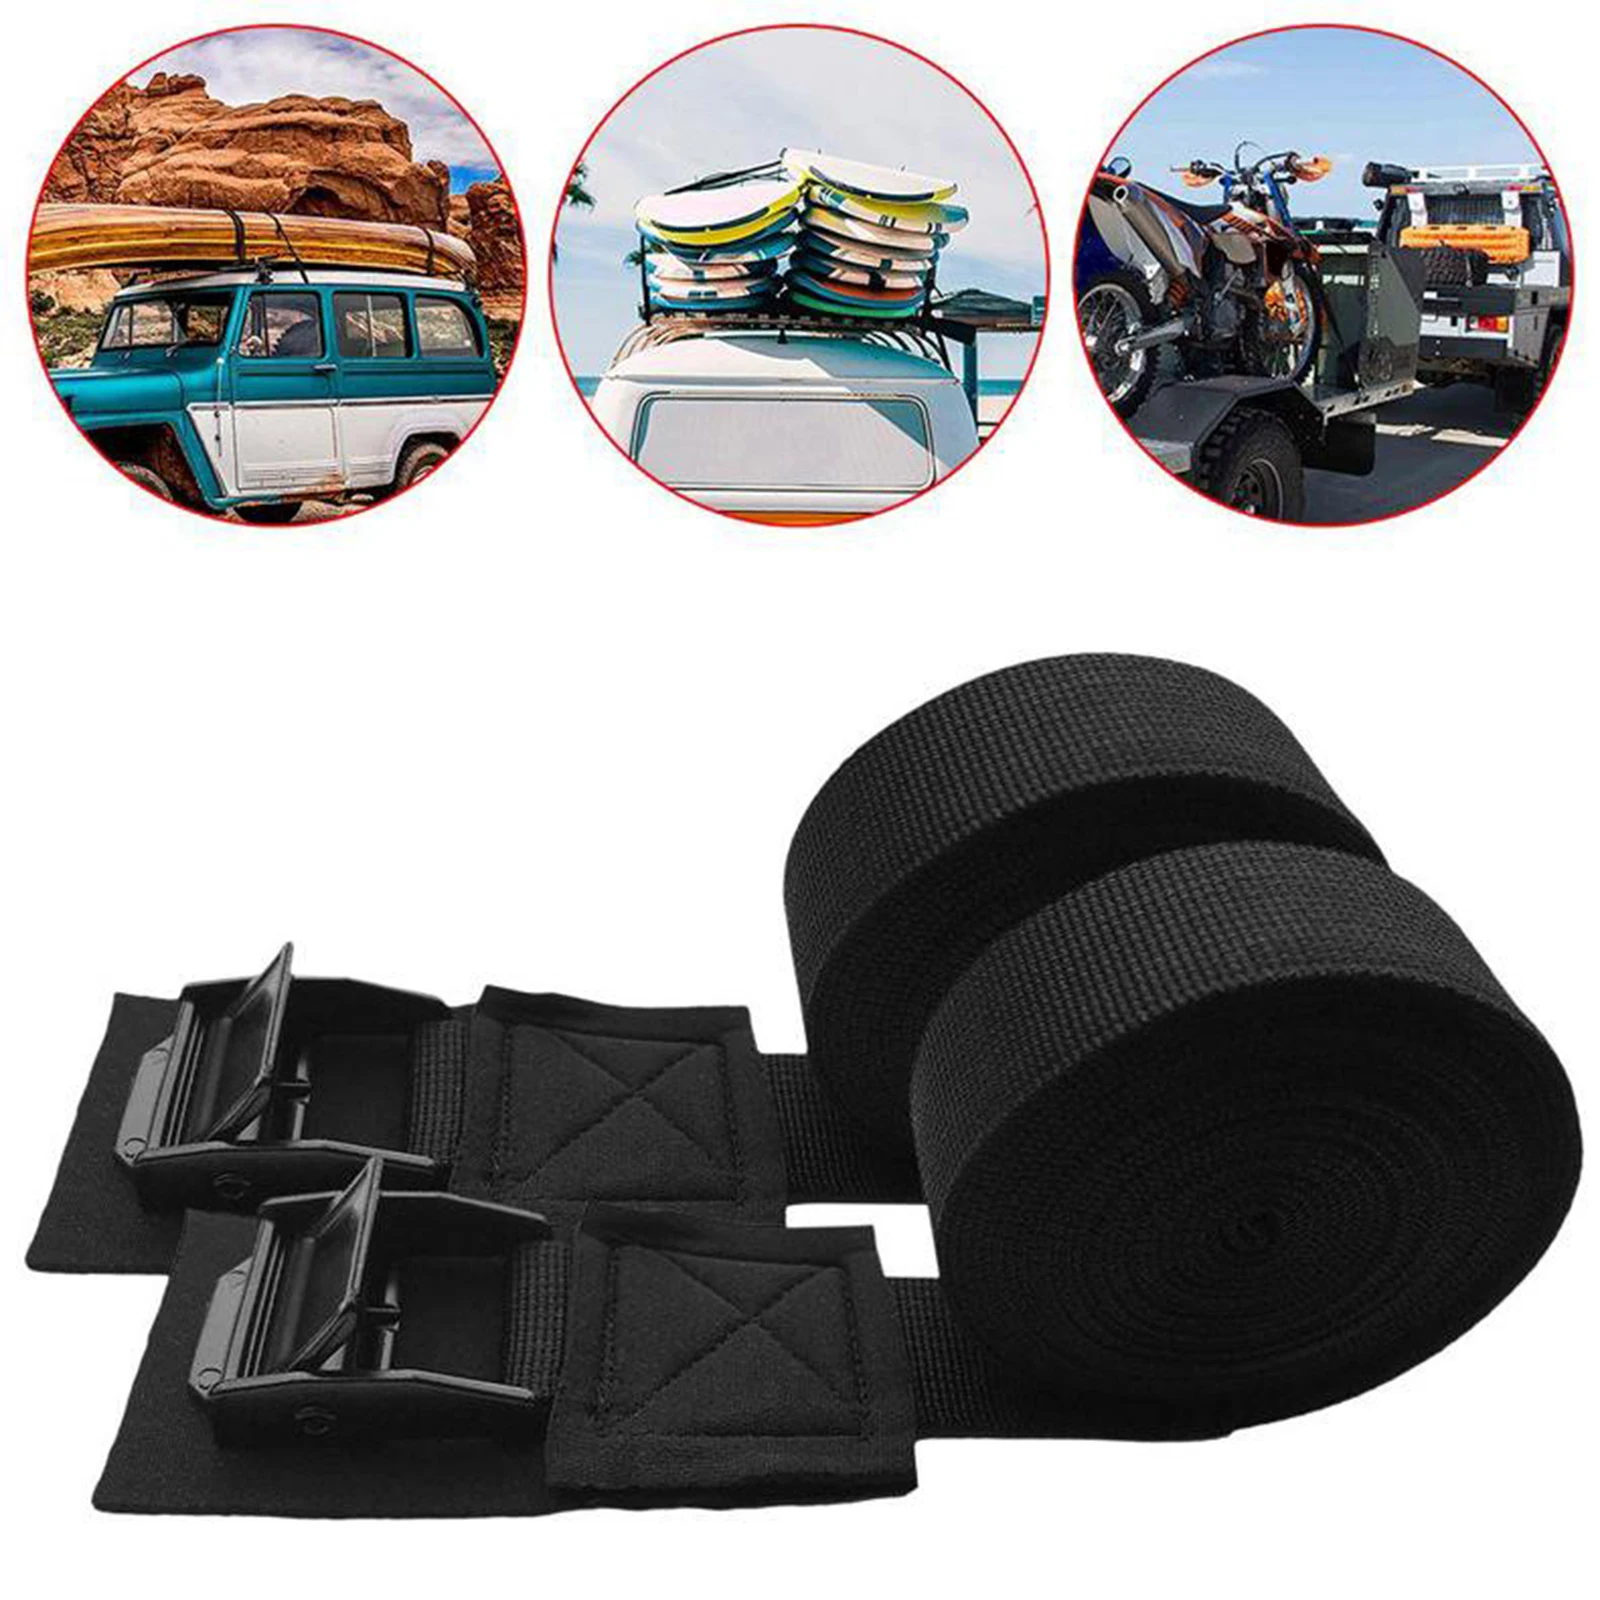 3meters*25mm Car Tension Rope Tie Down Strap Strong Ratchet Belt Luggage Bag Cargo Lashing with Metal Buckle Tow Rope Tensioner